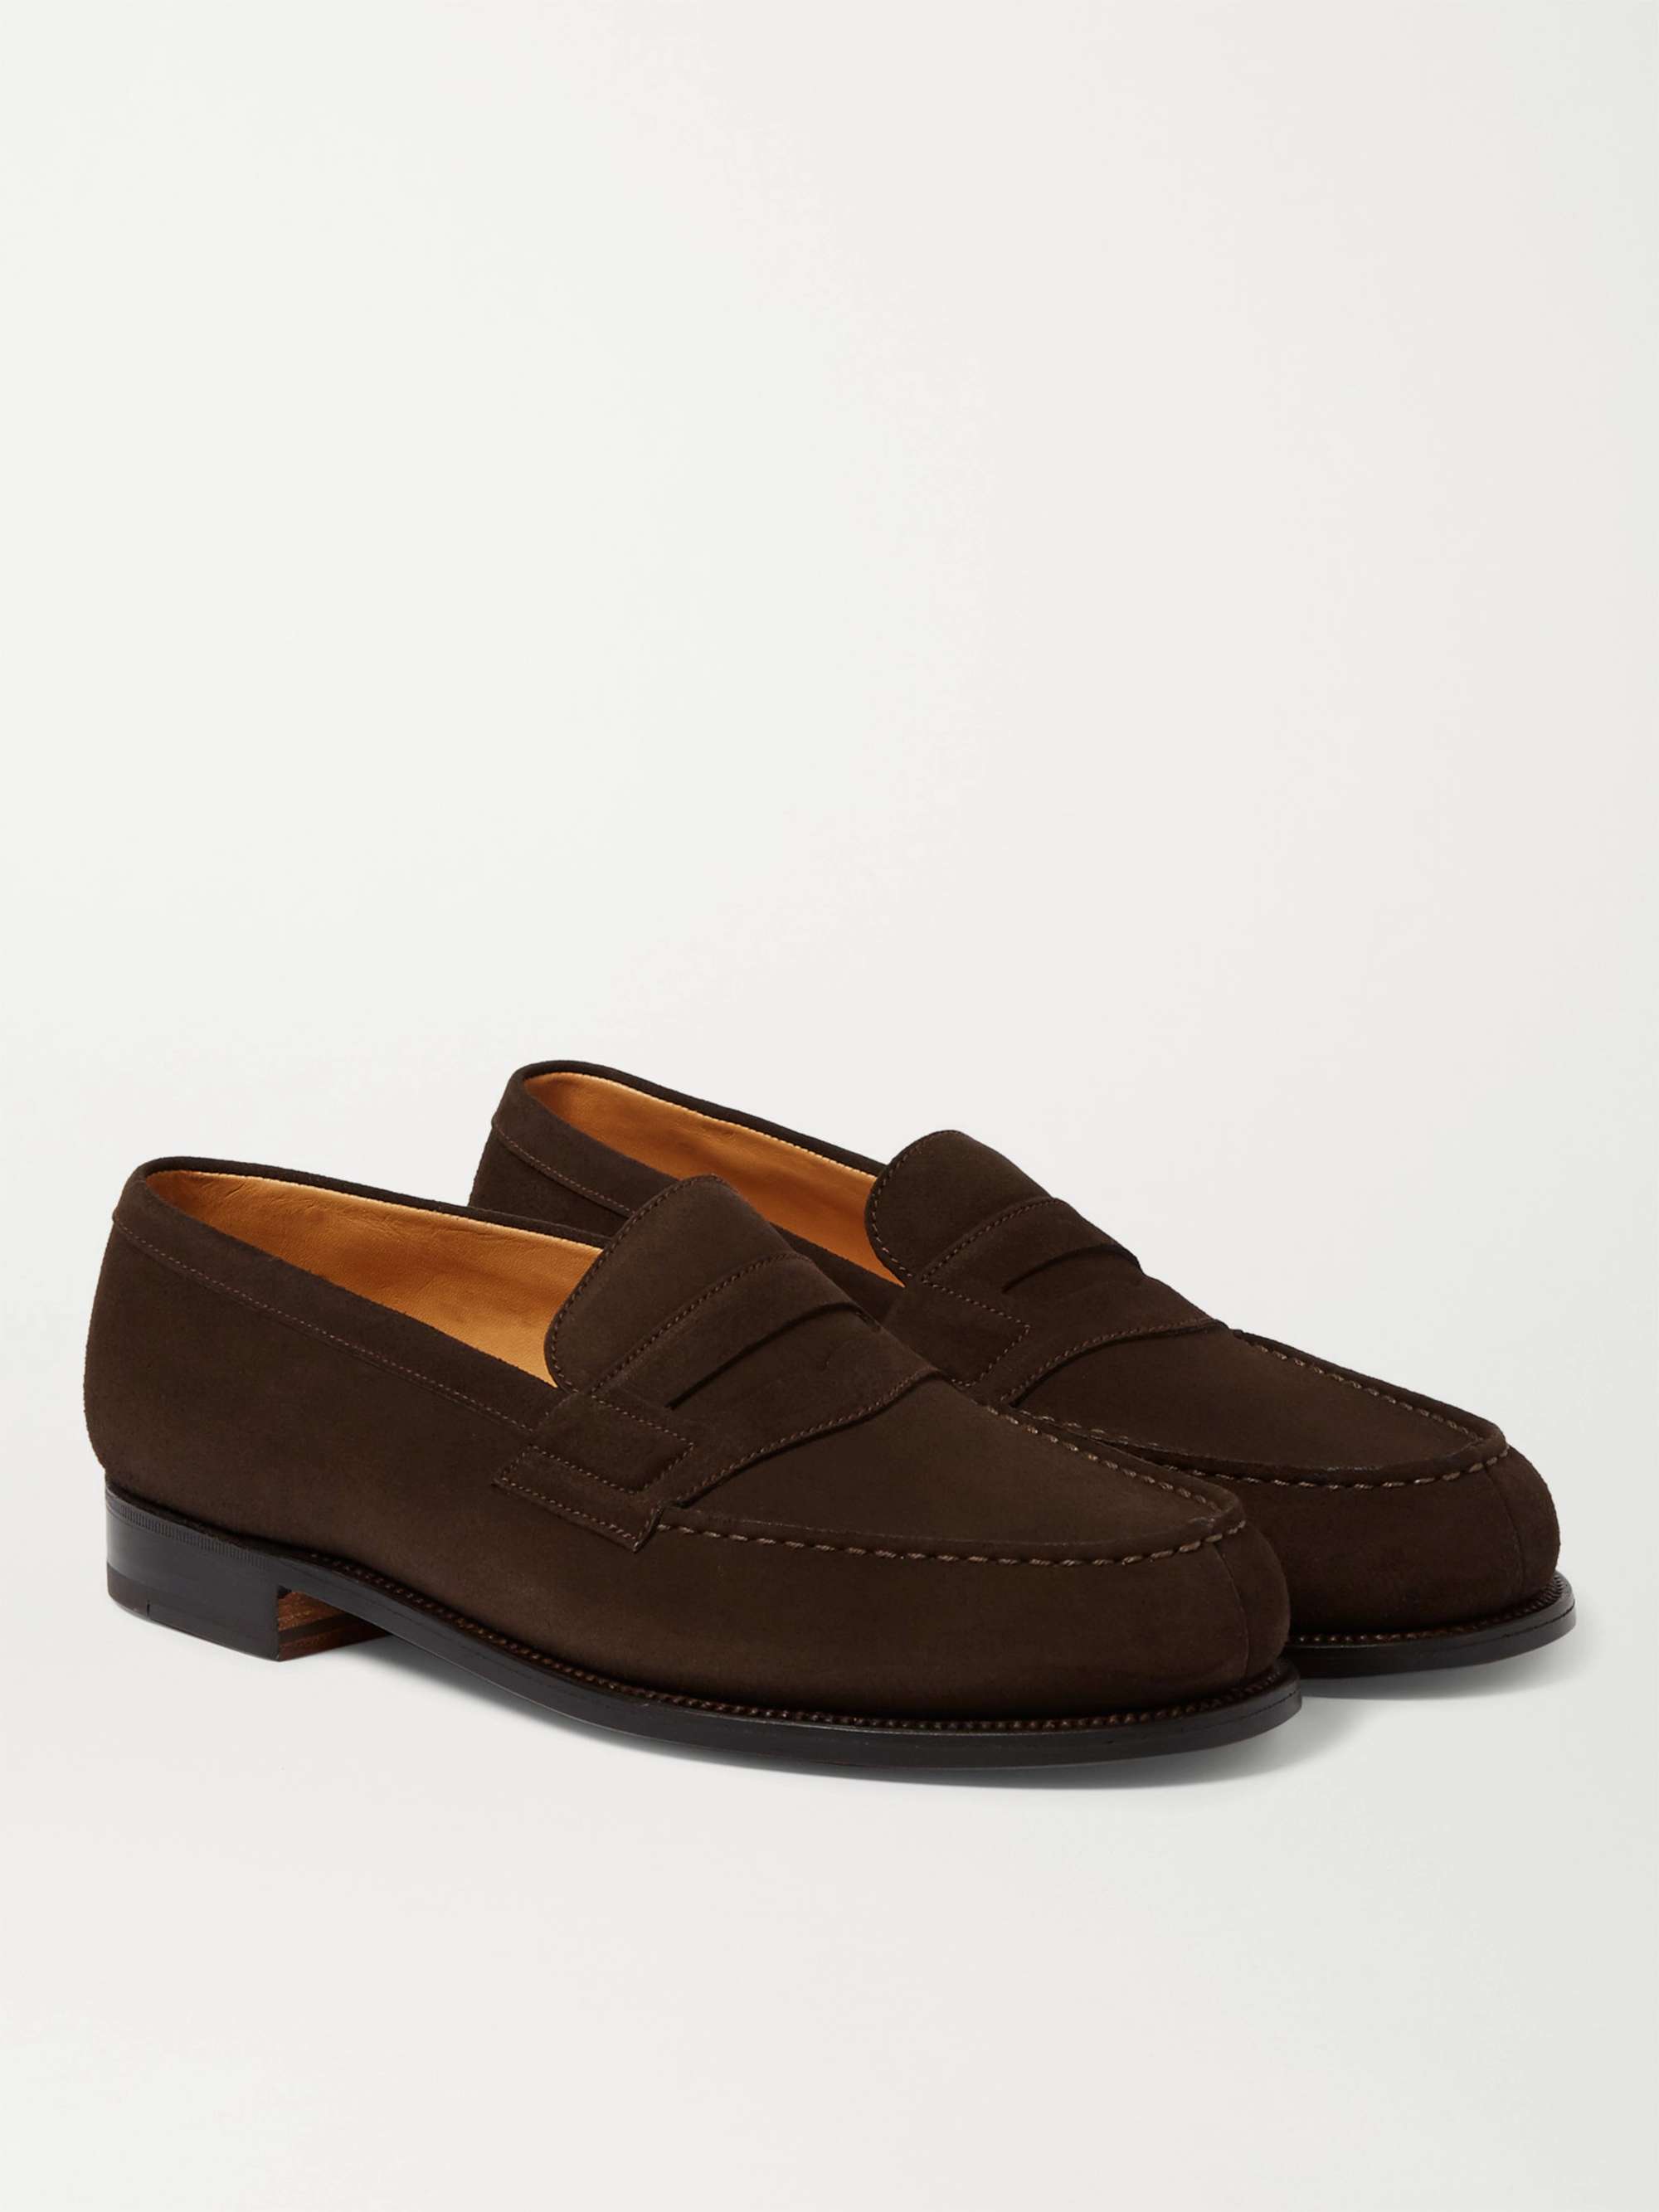 J.M. WESTON 180 Moccasin Suede Loafers